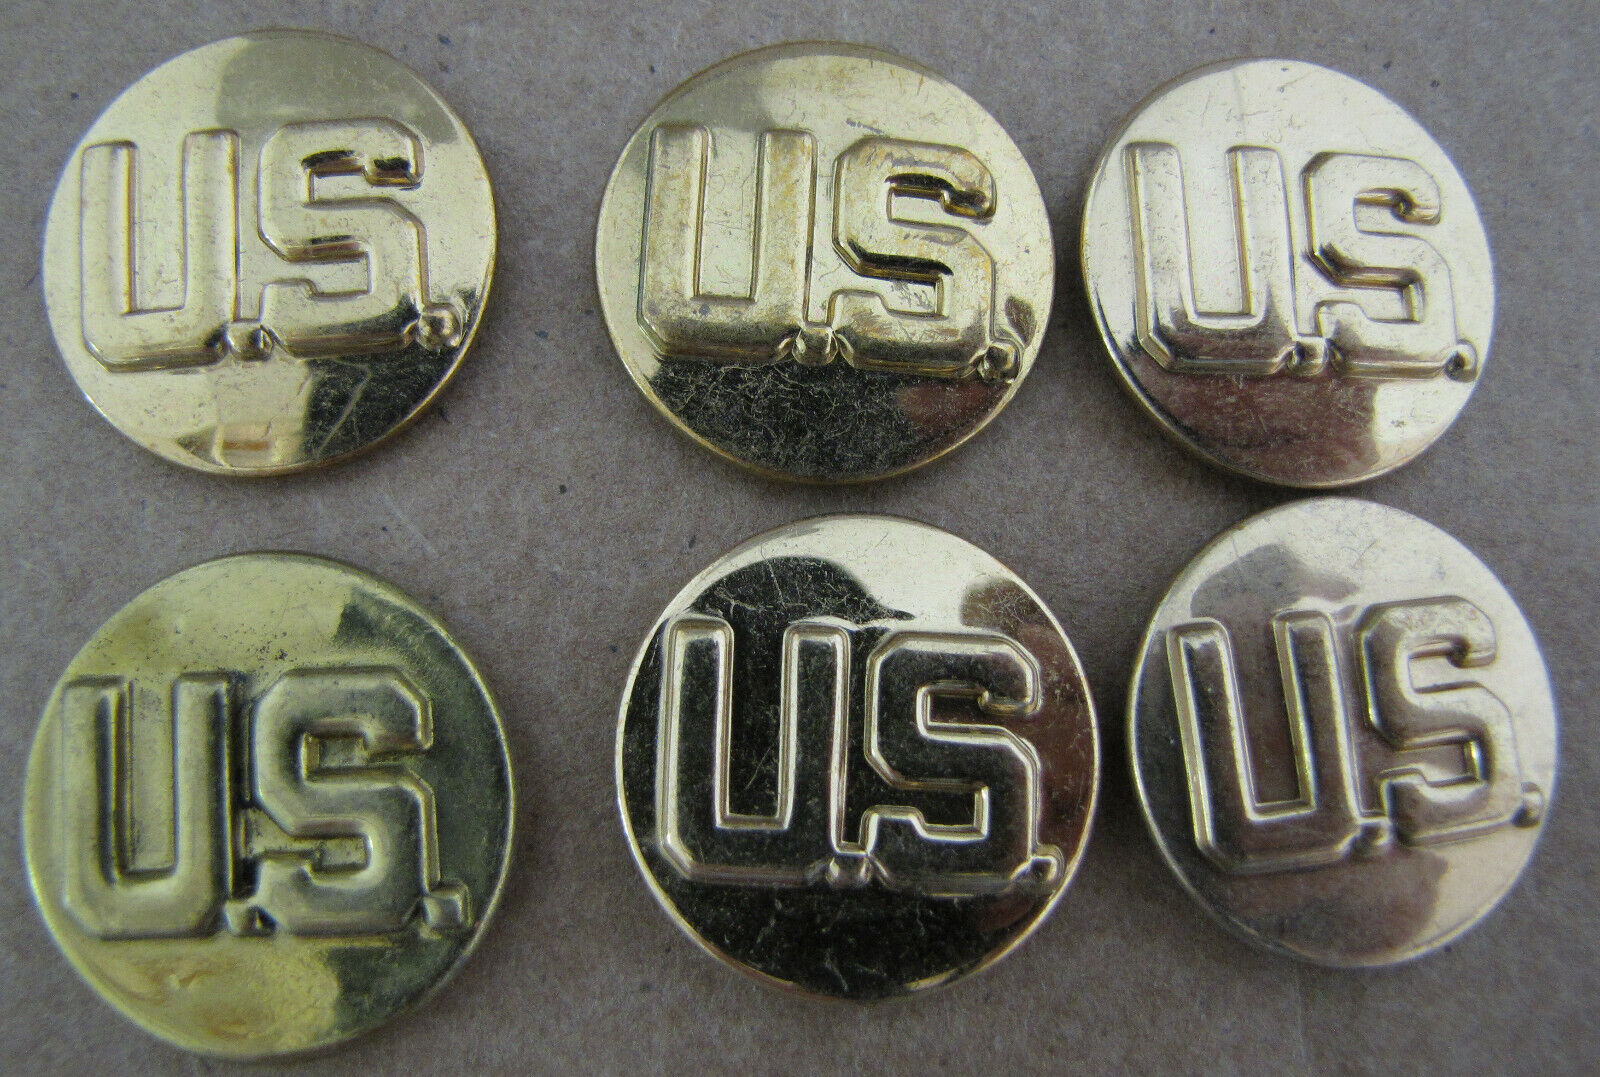 Original WW2 US Army Enlisted Men's US collar disc, lot of 3 discs